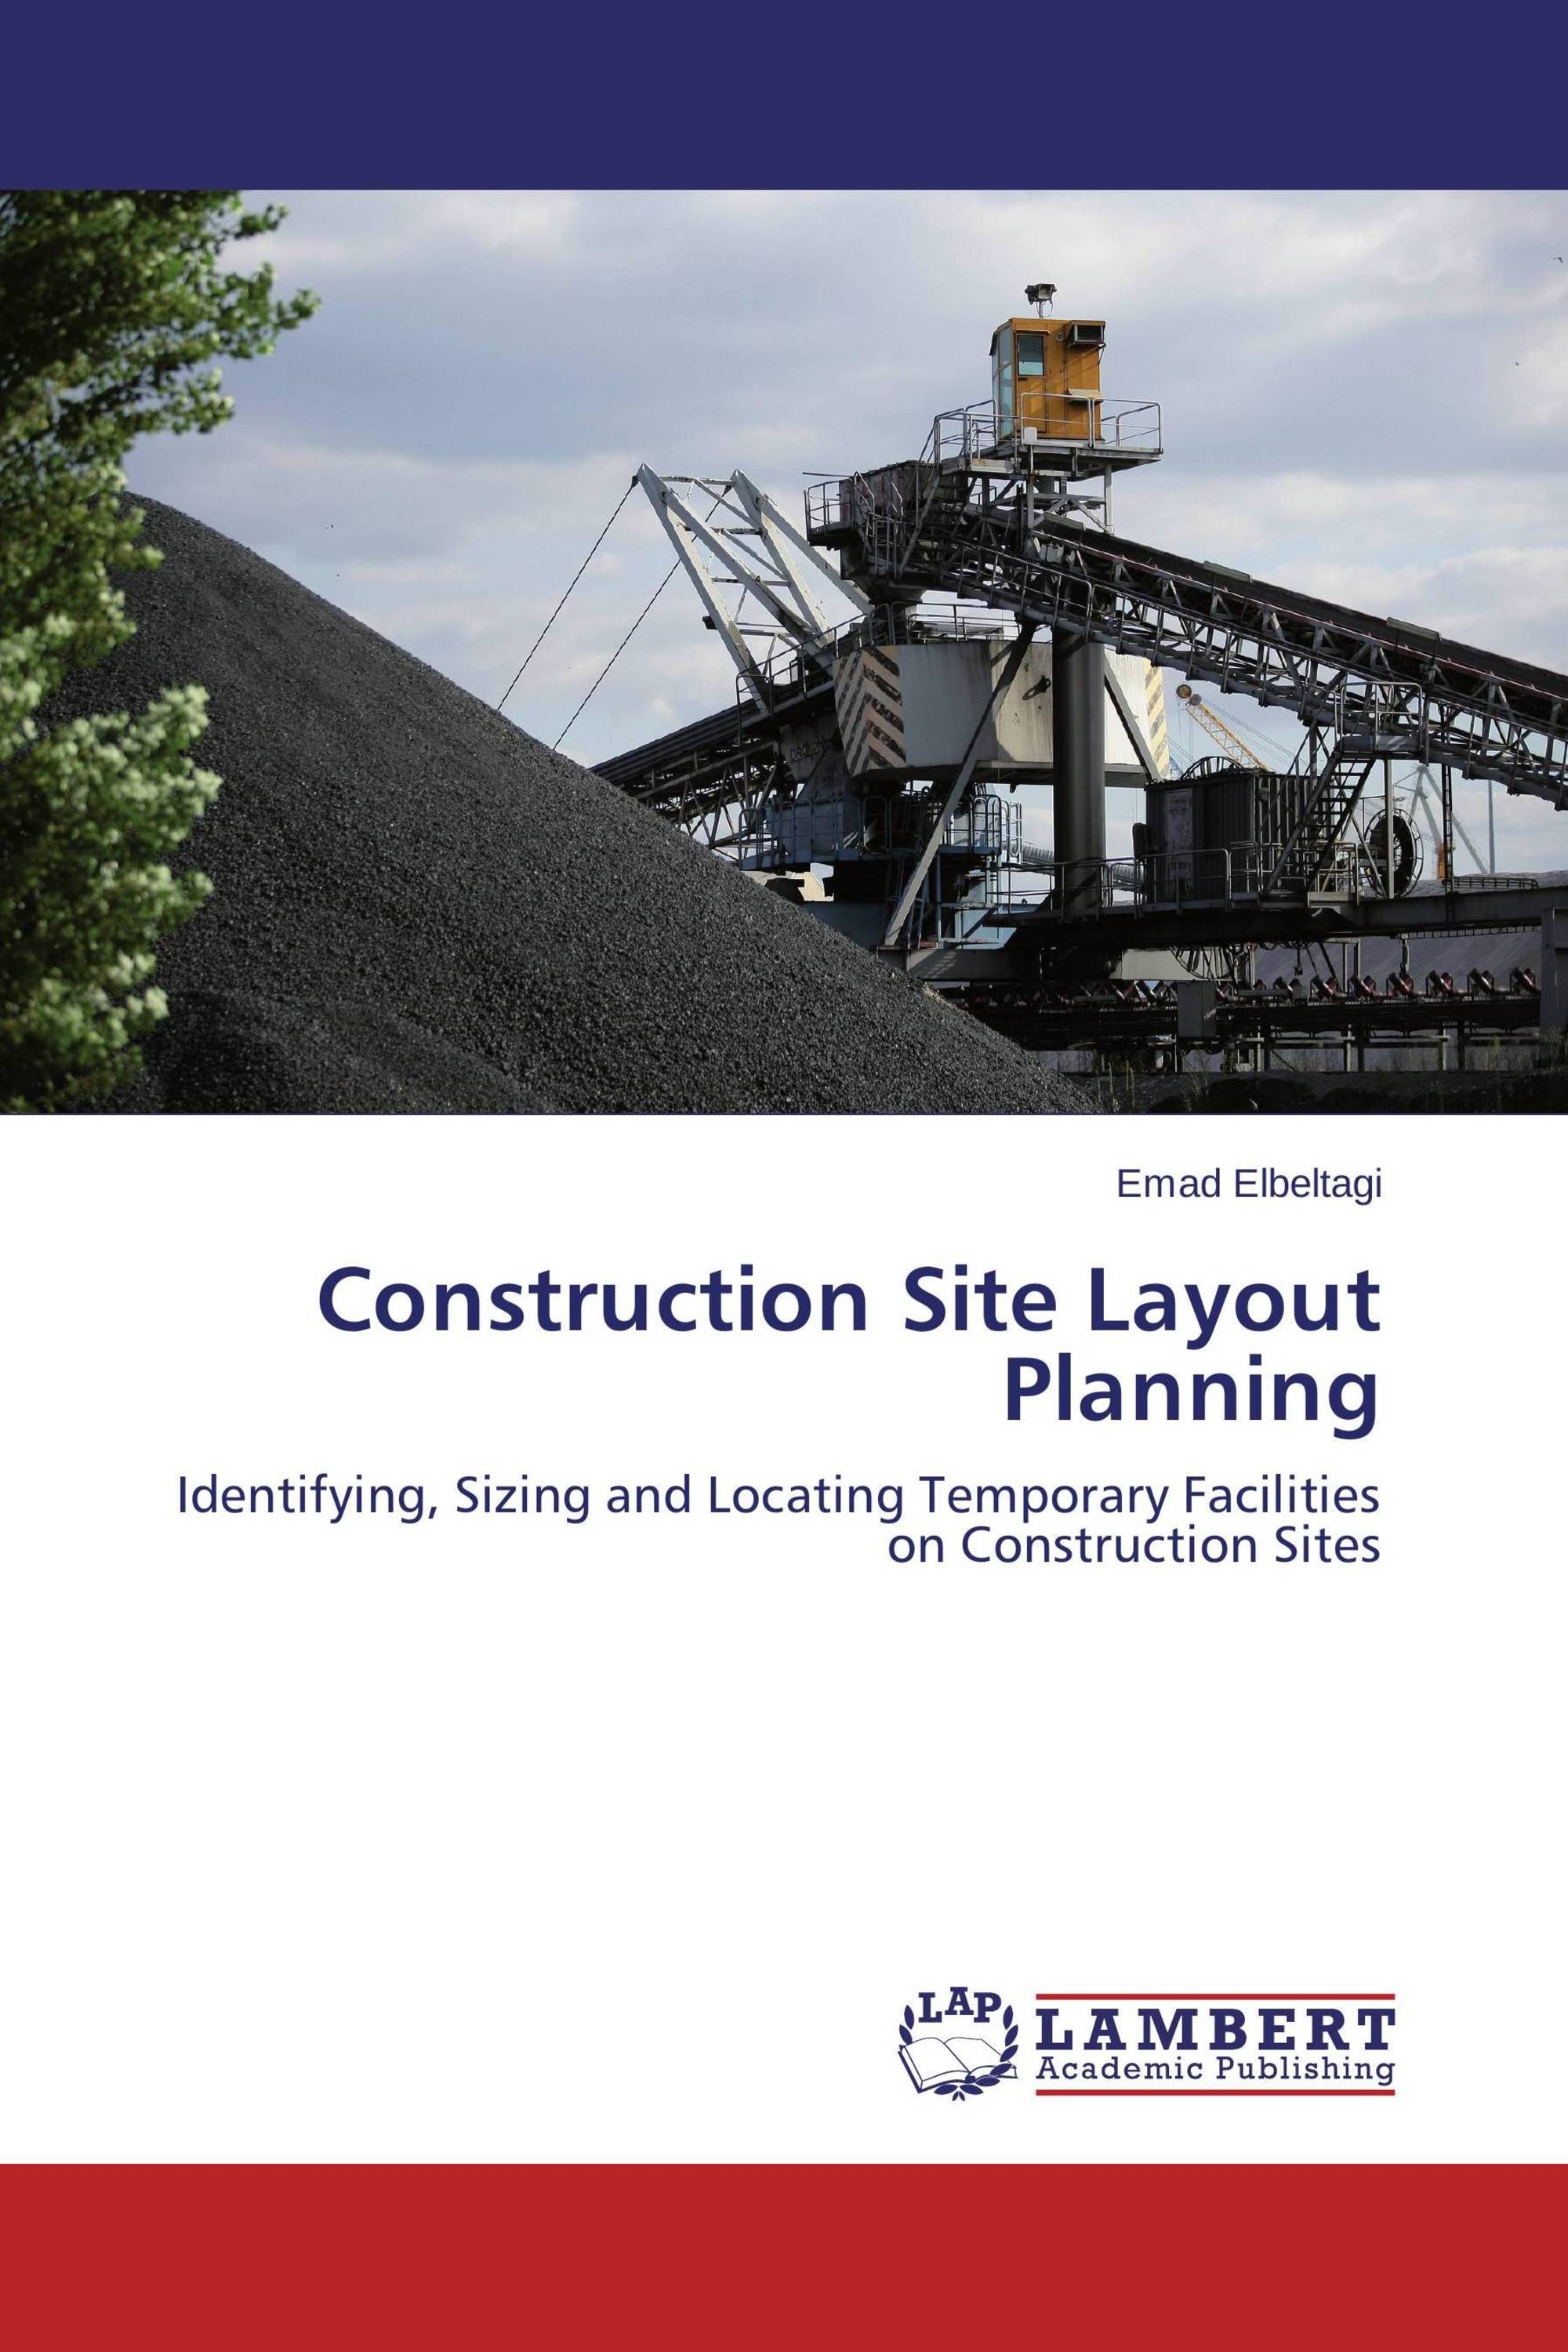 Construction Site Layout Planning / 978-3-659-54067-7 / 9783659540677